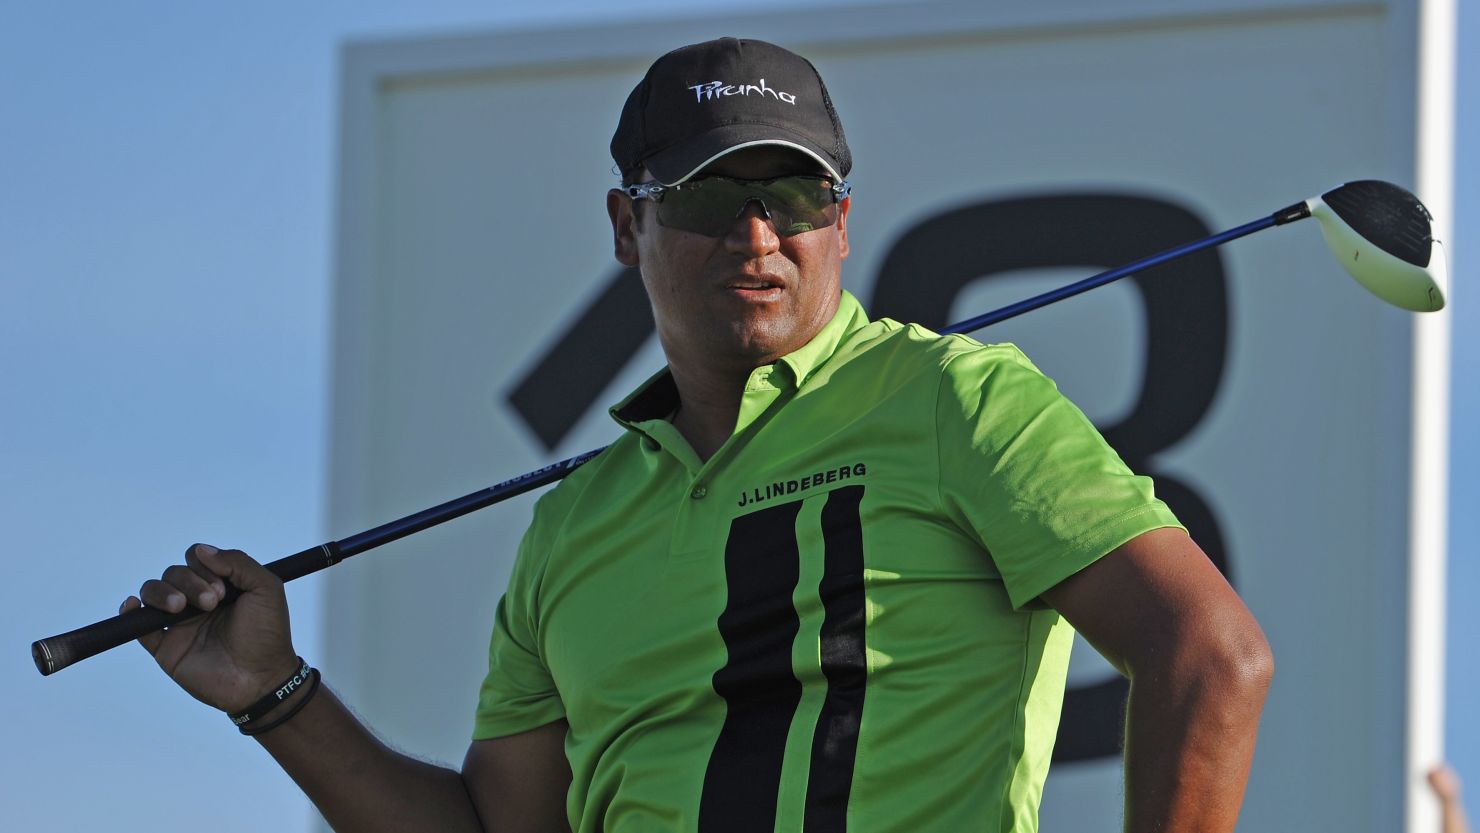 New Zealand's Michael Campbell is enjoying a good week at the Portugal Masters following an extended period of poor form.